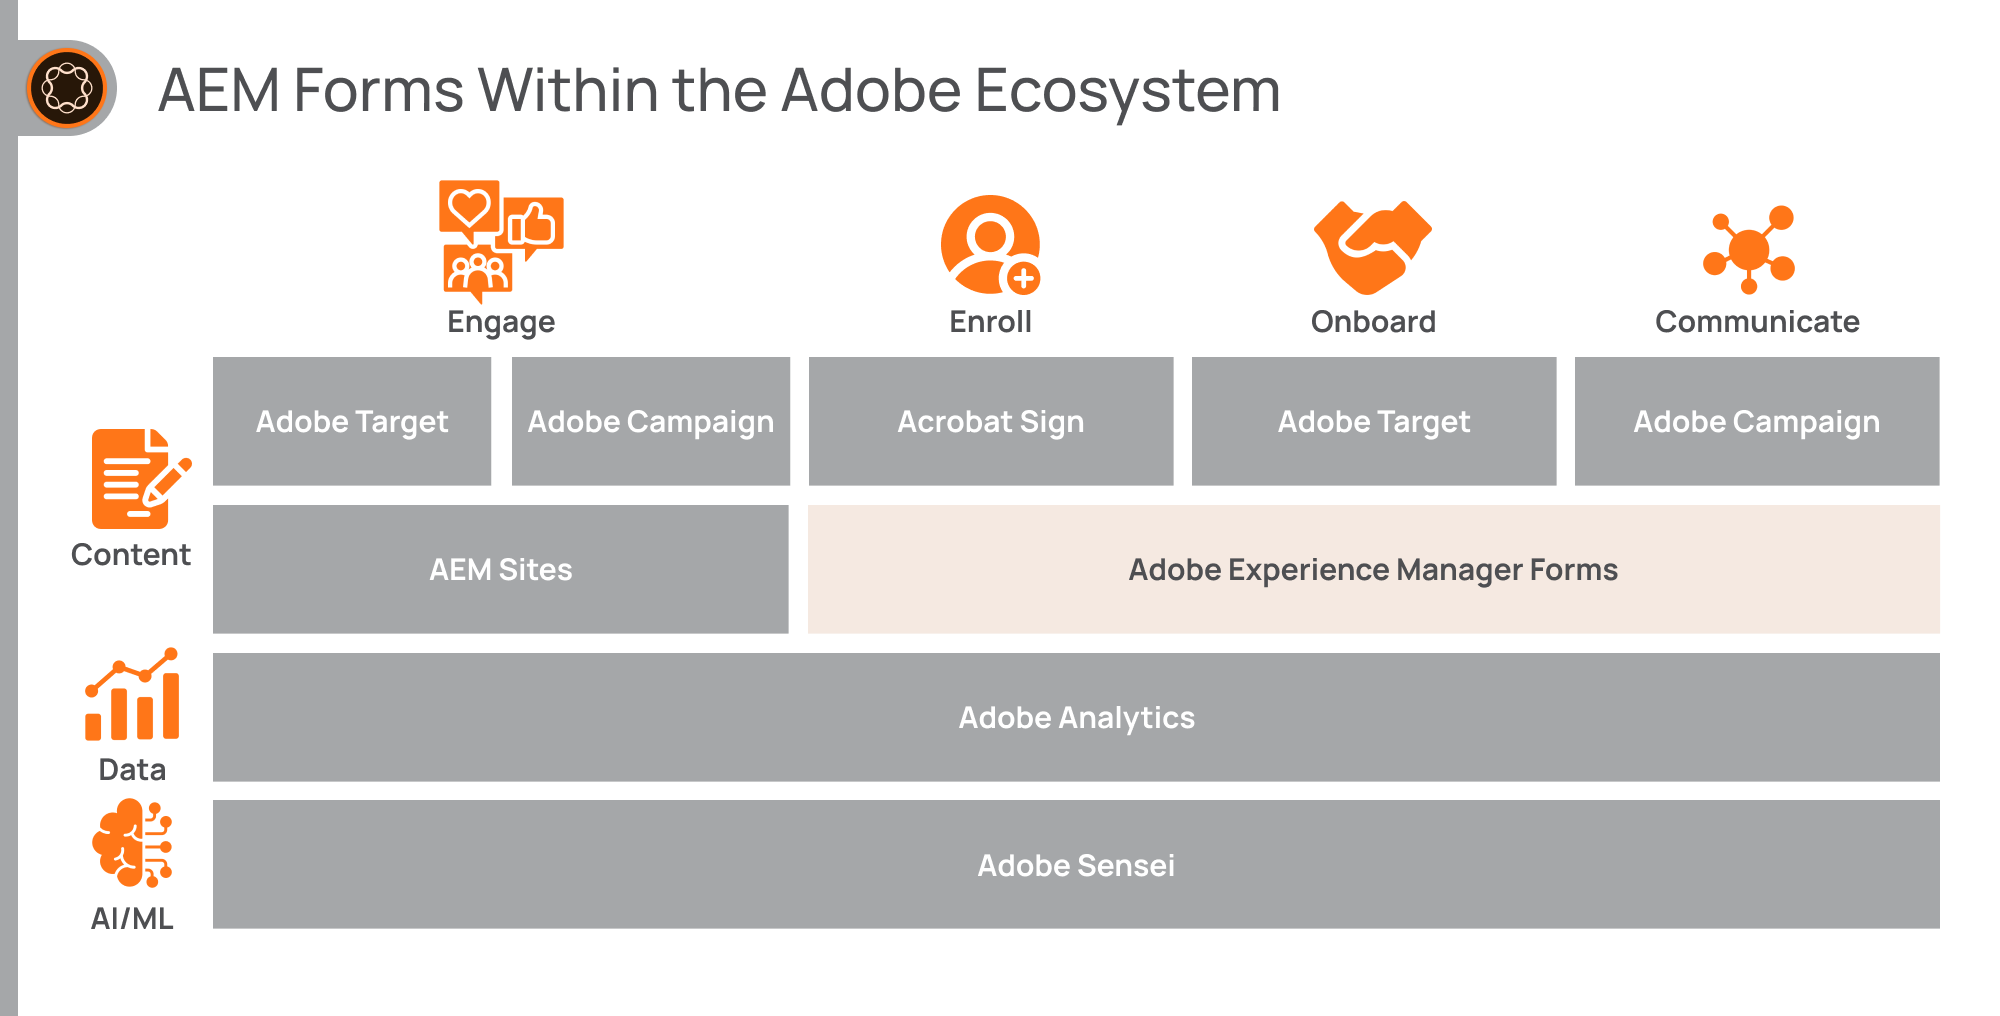 AEM Forms integrates with other Adobe products